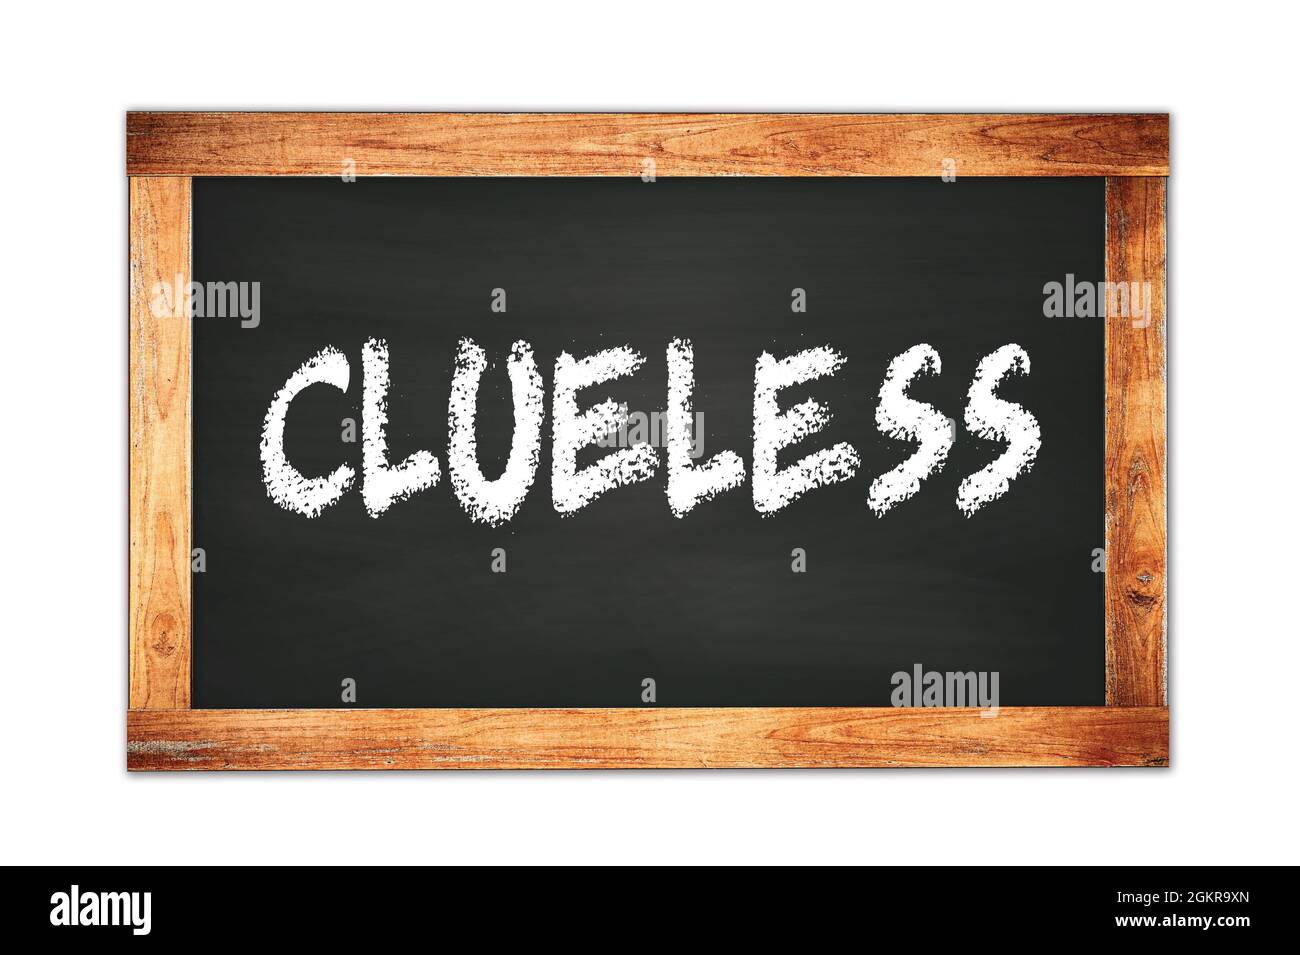 Clueless text Cut Out Stock Images & Pictures - Alamy